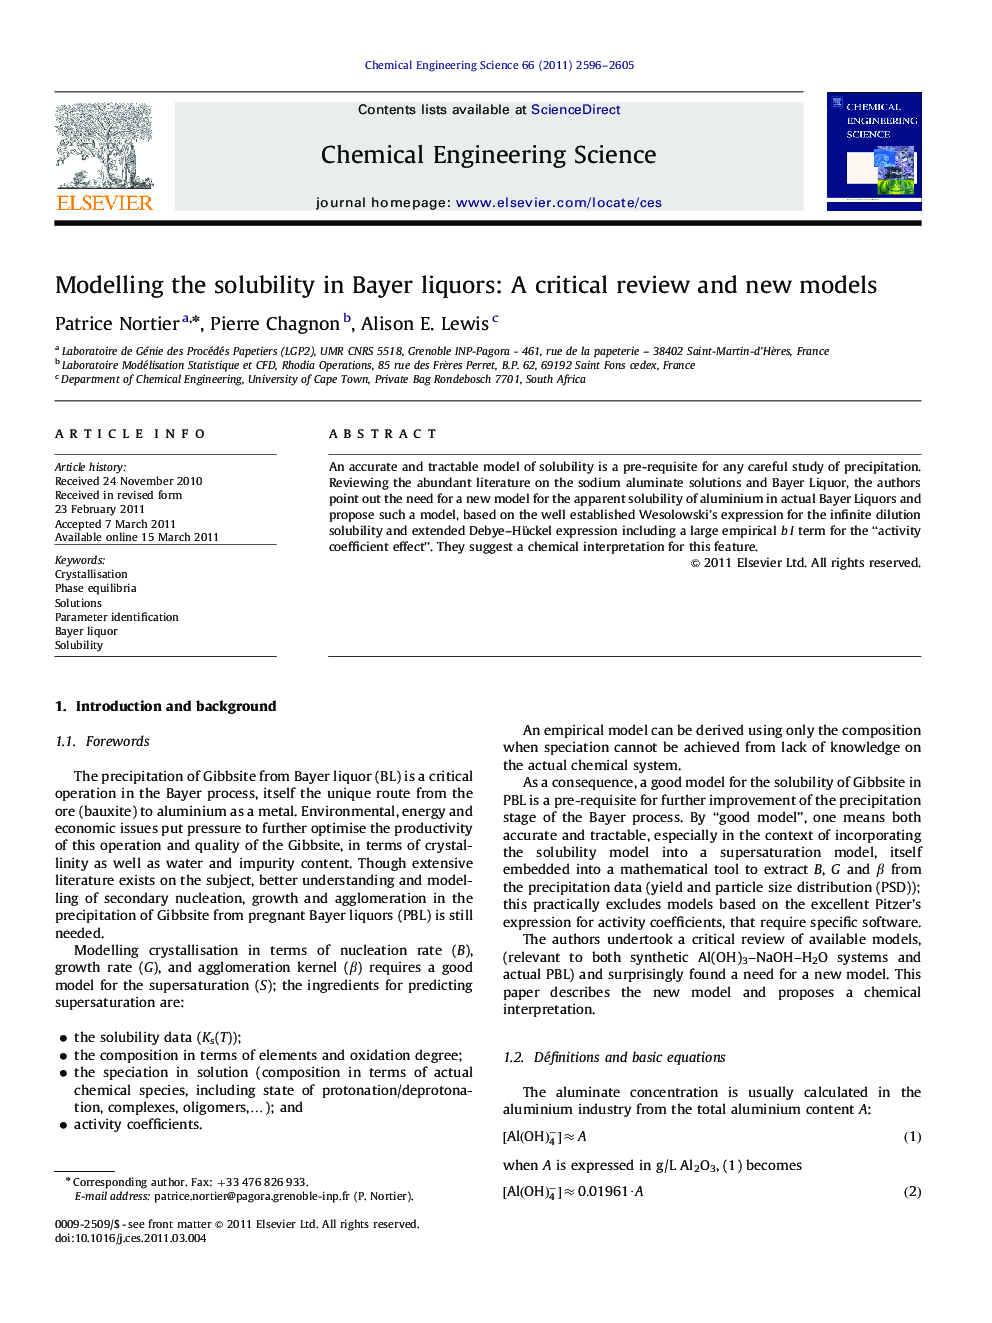 Modelling the solubility in Bayer liquors: A critical review and new models